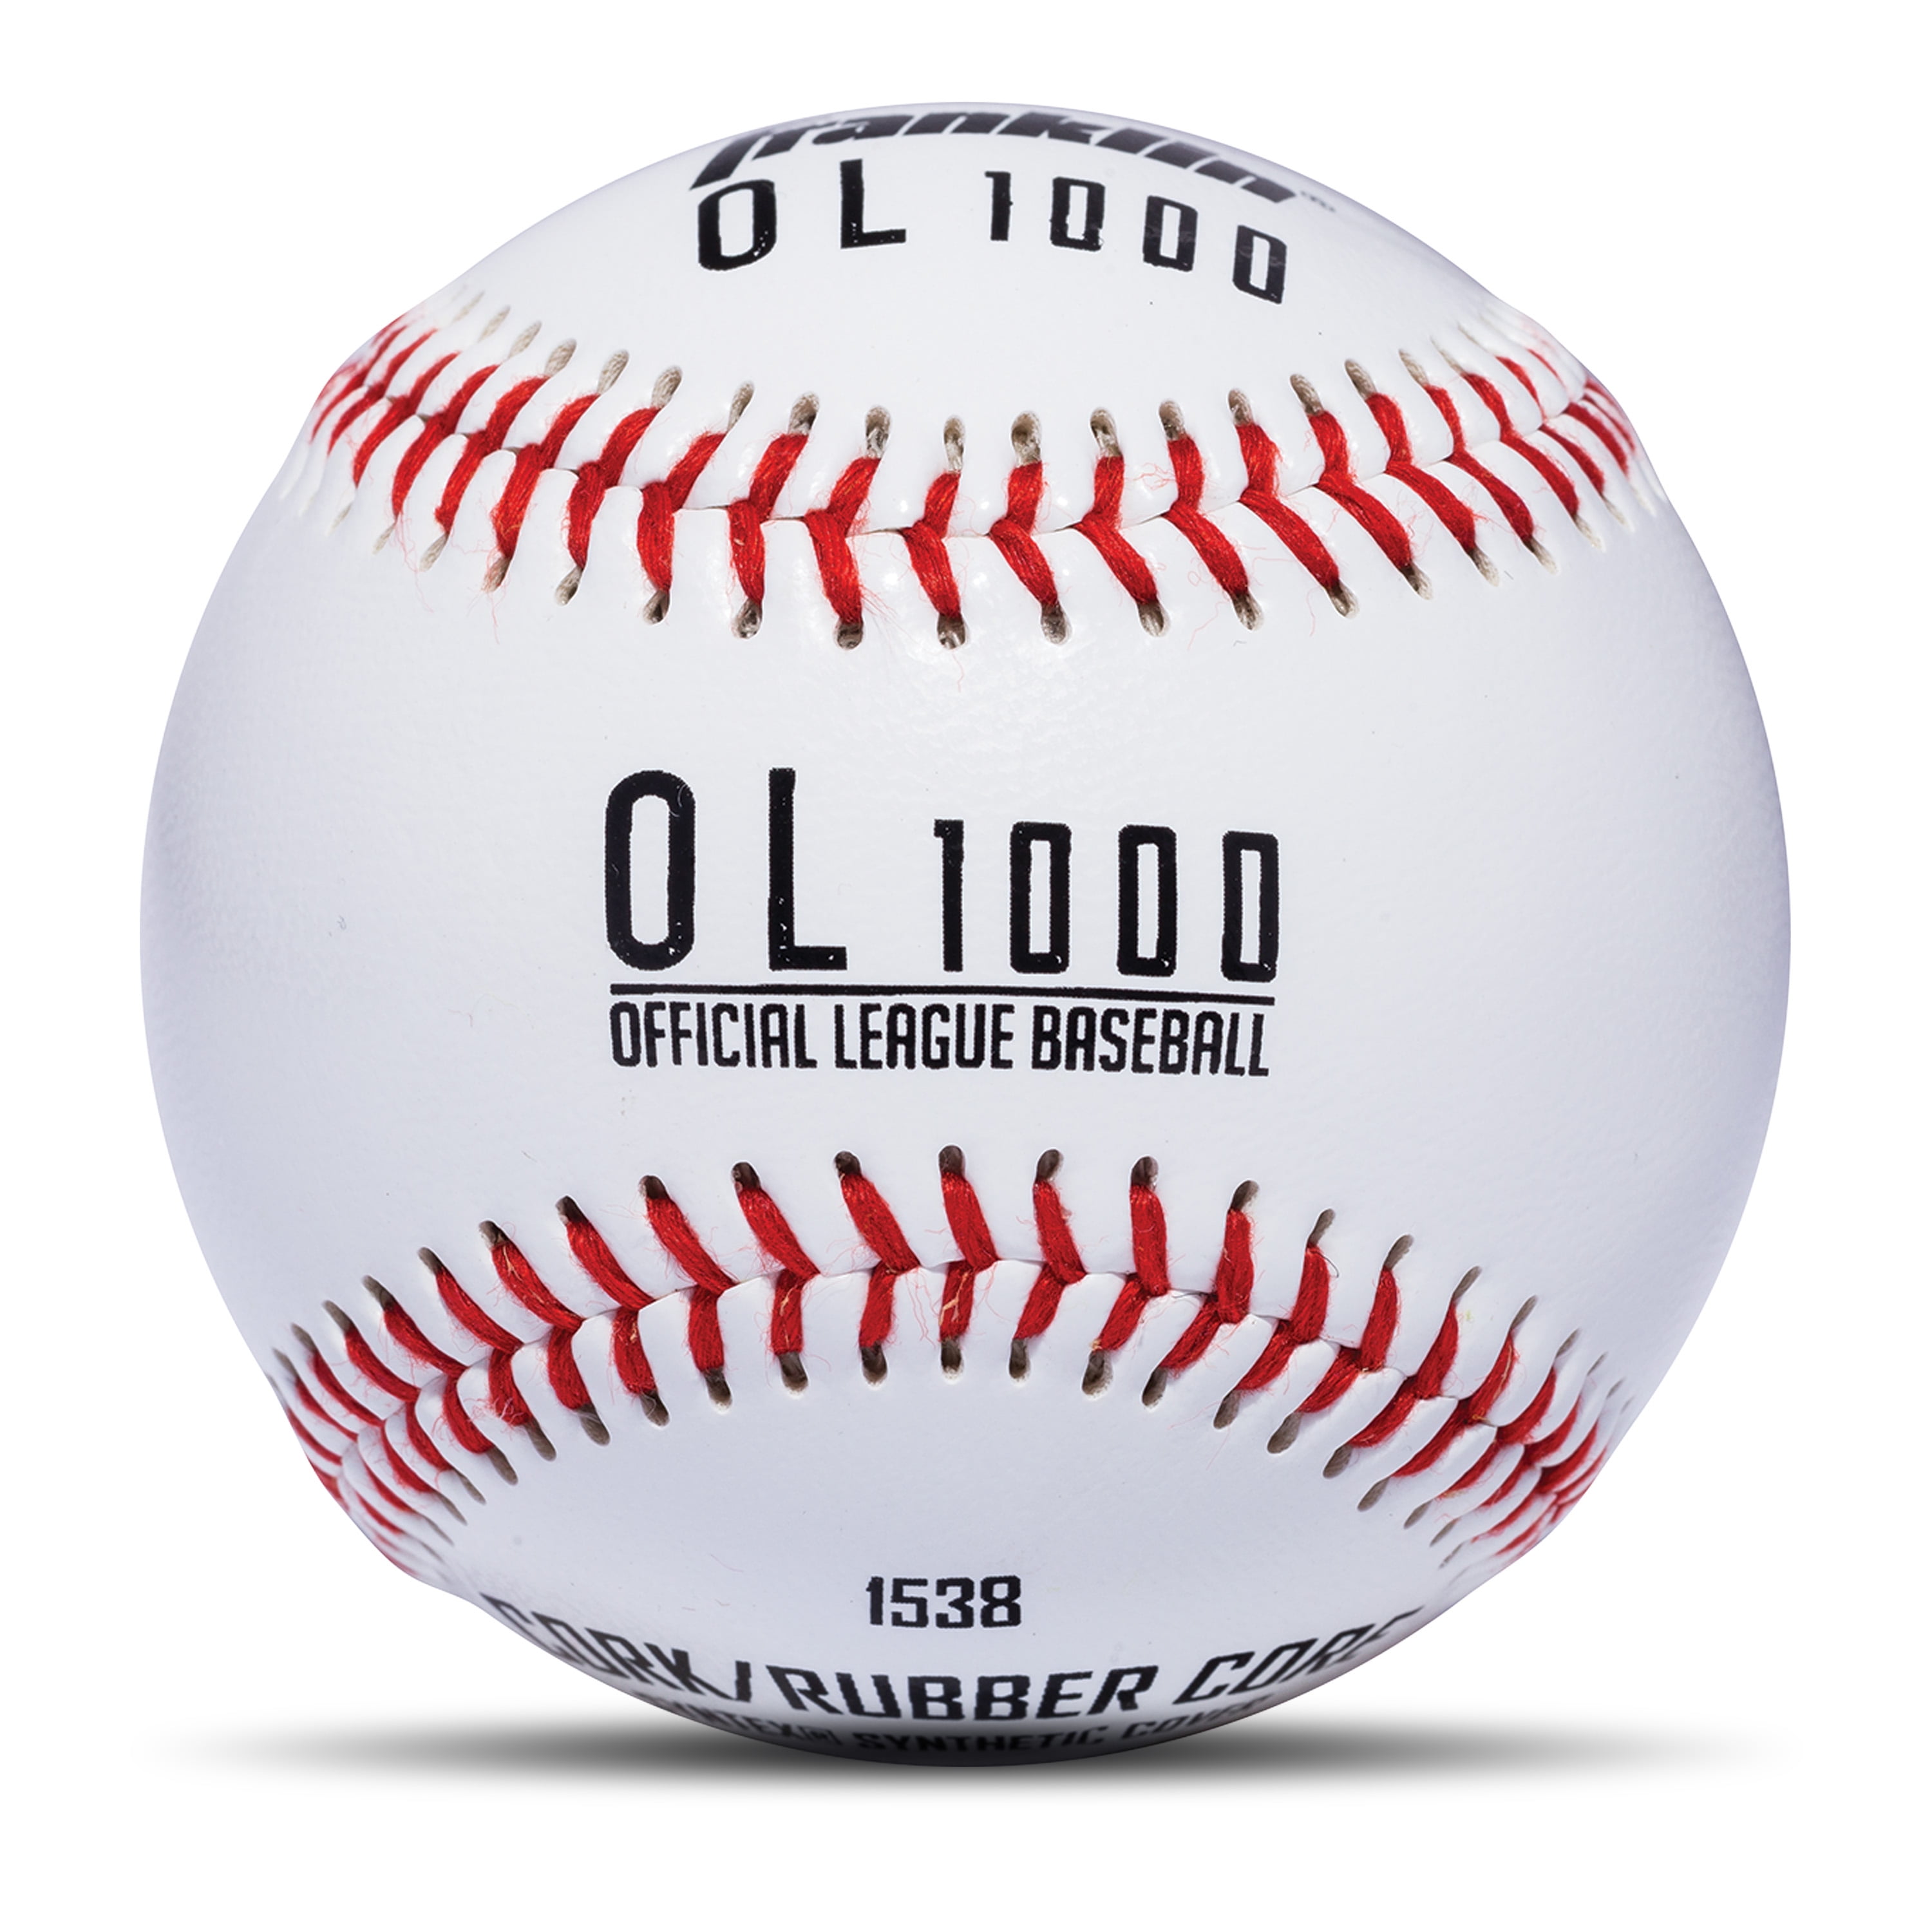 Franklin Sports Official Size Baseballs - OL1000 9 inch Practice Baseballs - Official League Baseballs - Great for Practice + Training - Official Size